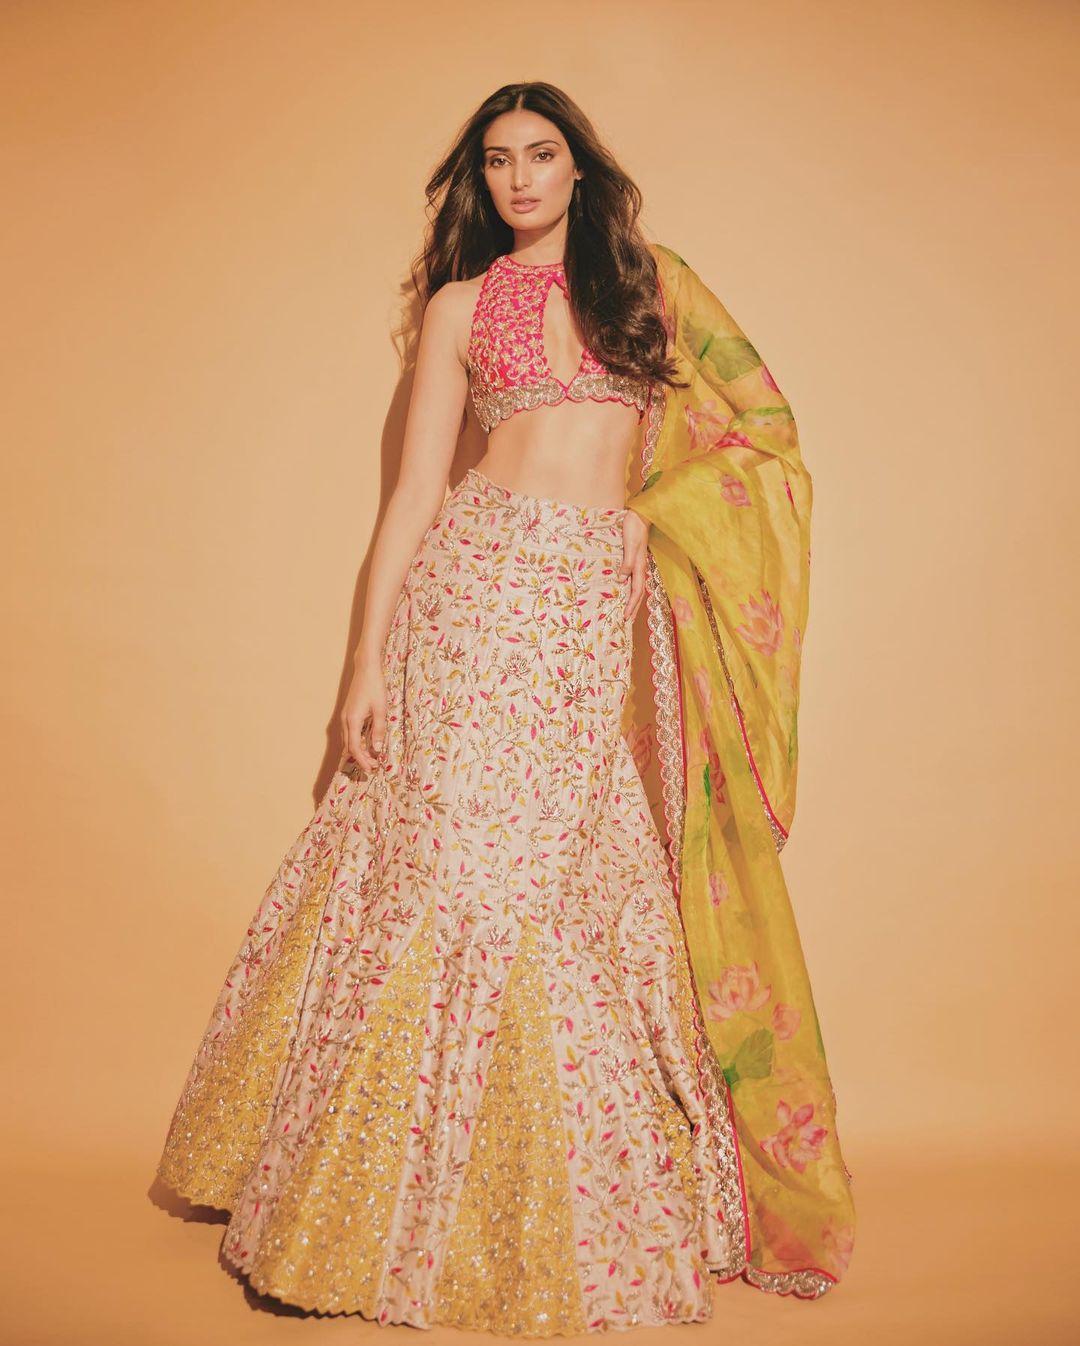 It's time to up your game this Diwali 2023! Athiya Shetty's ethnic wardrobe gives us the perfect inspiration for the festive season. For instance, this coral lehenga set is the perfect mix of contemporary and traditional. The top is a chic halter neck with a floral printed skirt